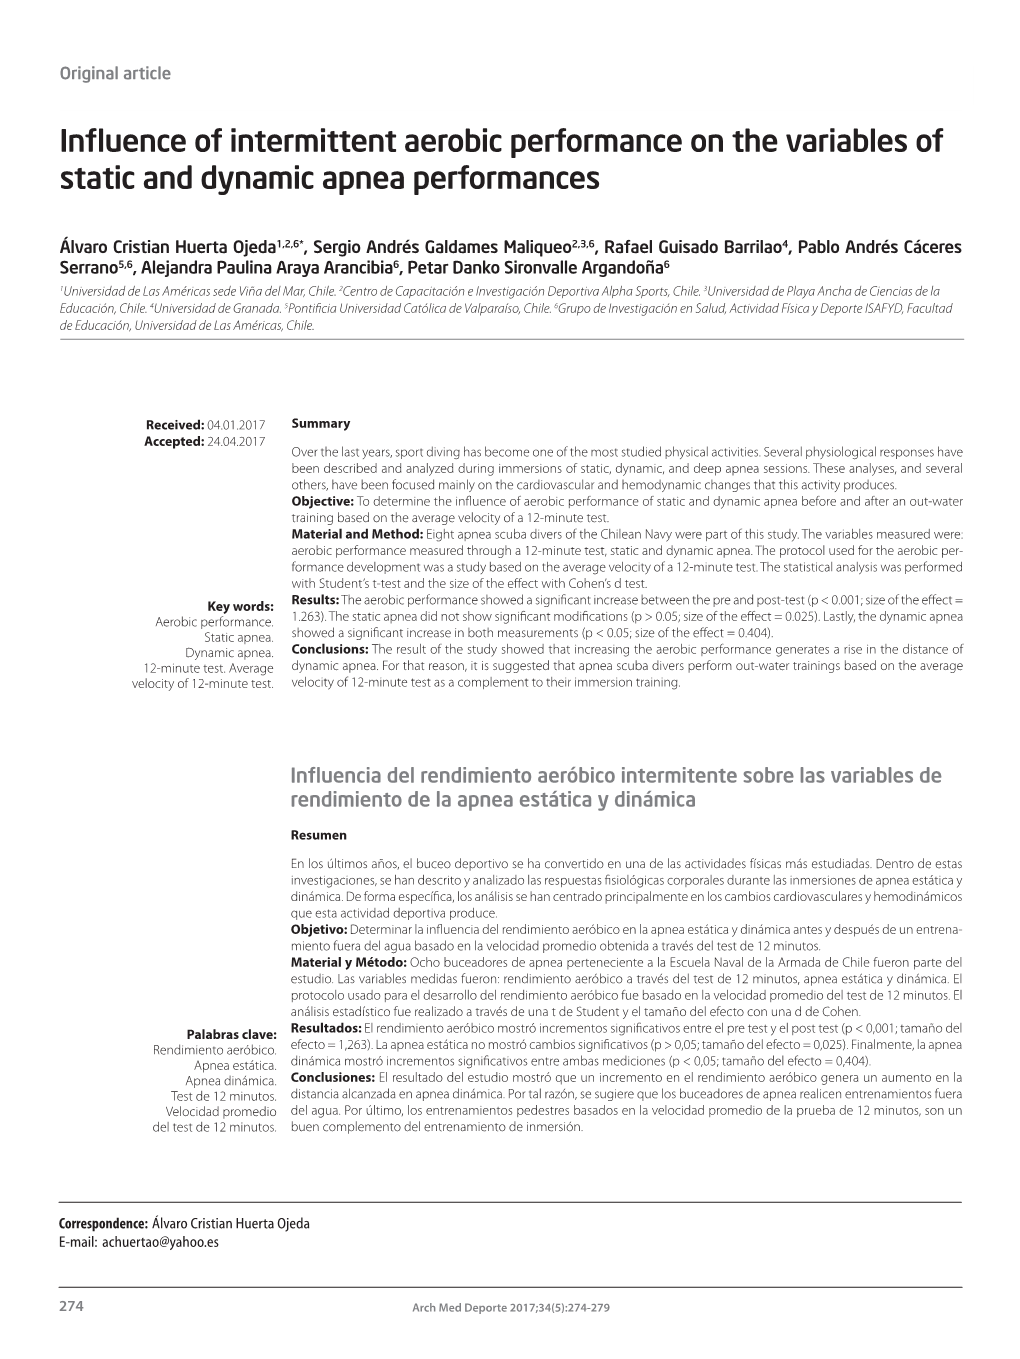 Influence of Intermittent Aerobic Performance on the Variables of Static and Dynamic Apnea Performances